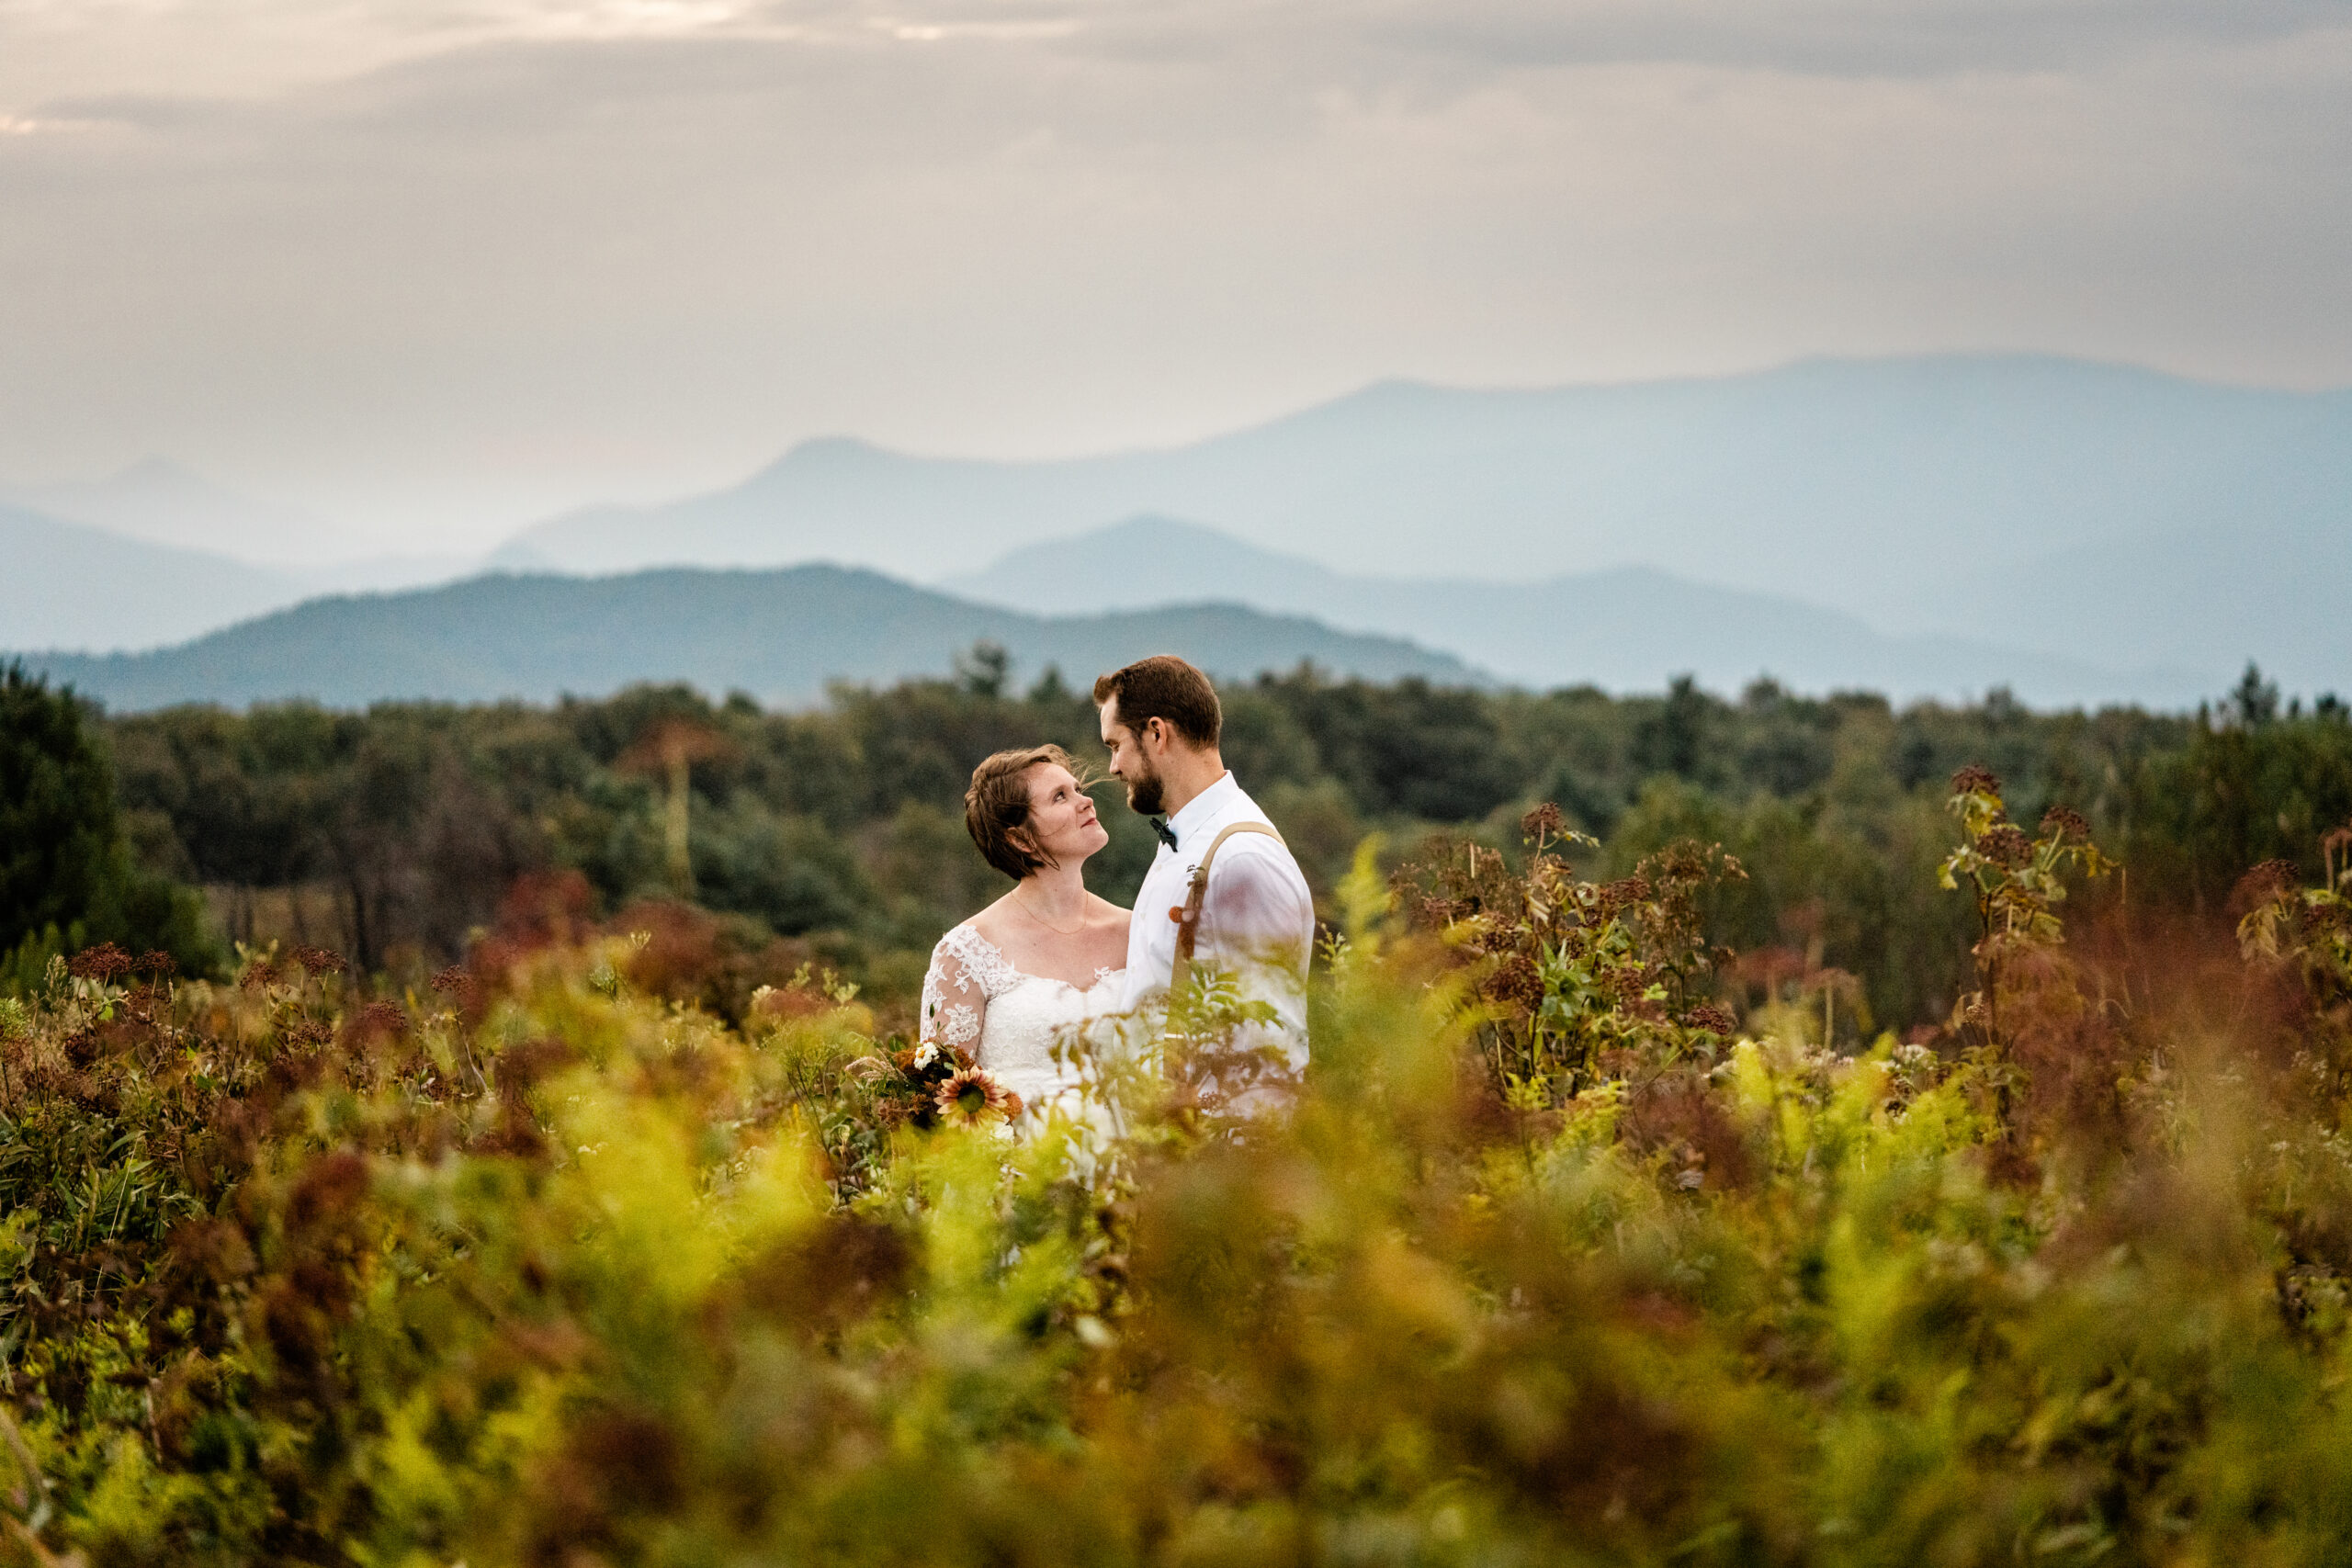 Bride and Groom stare into each others eyes in a field with tall flowers and mountains in the background